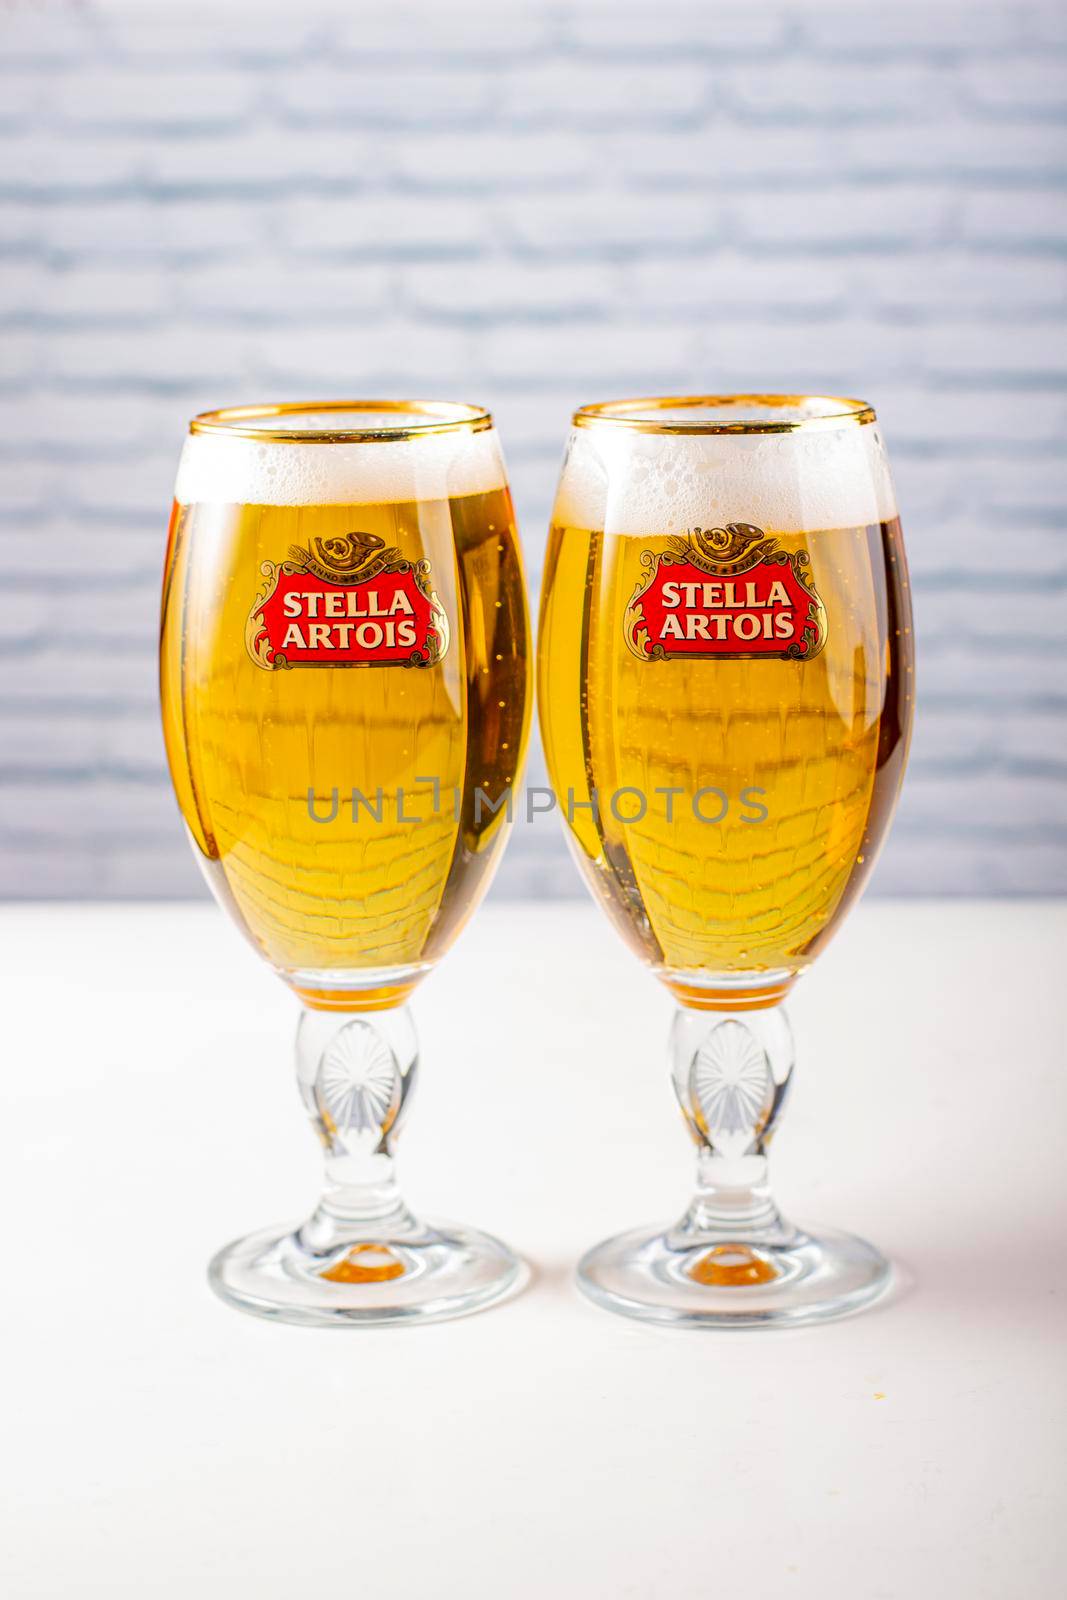 Two cups of Stella Artois full of beer